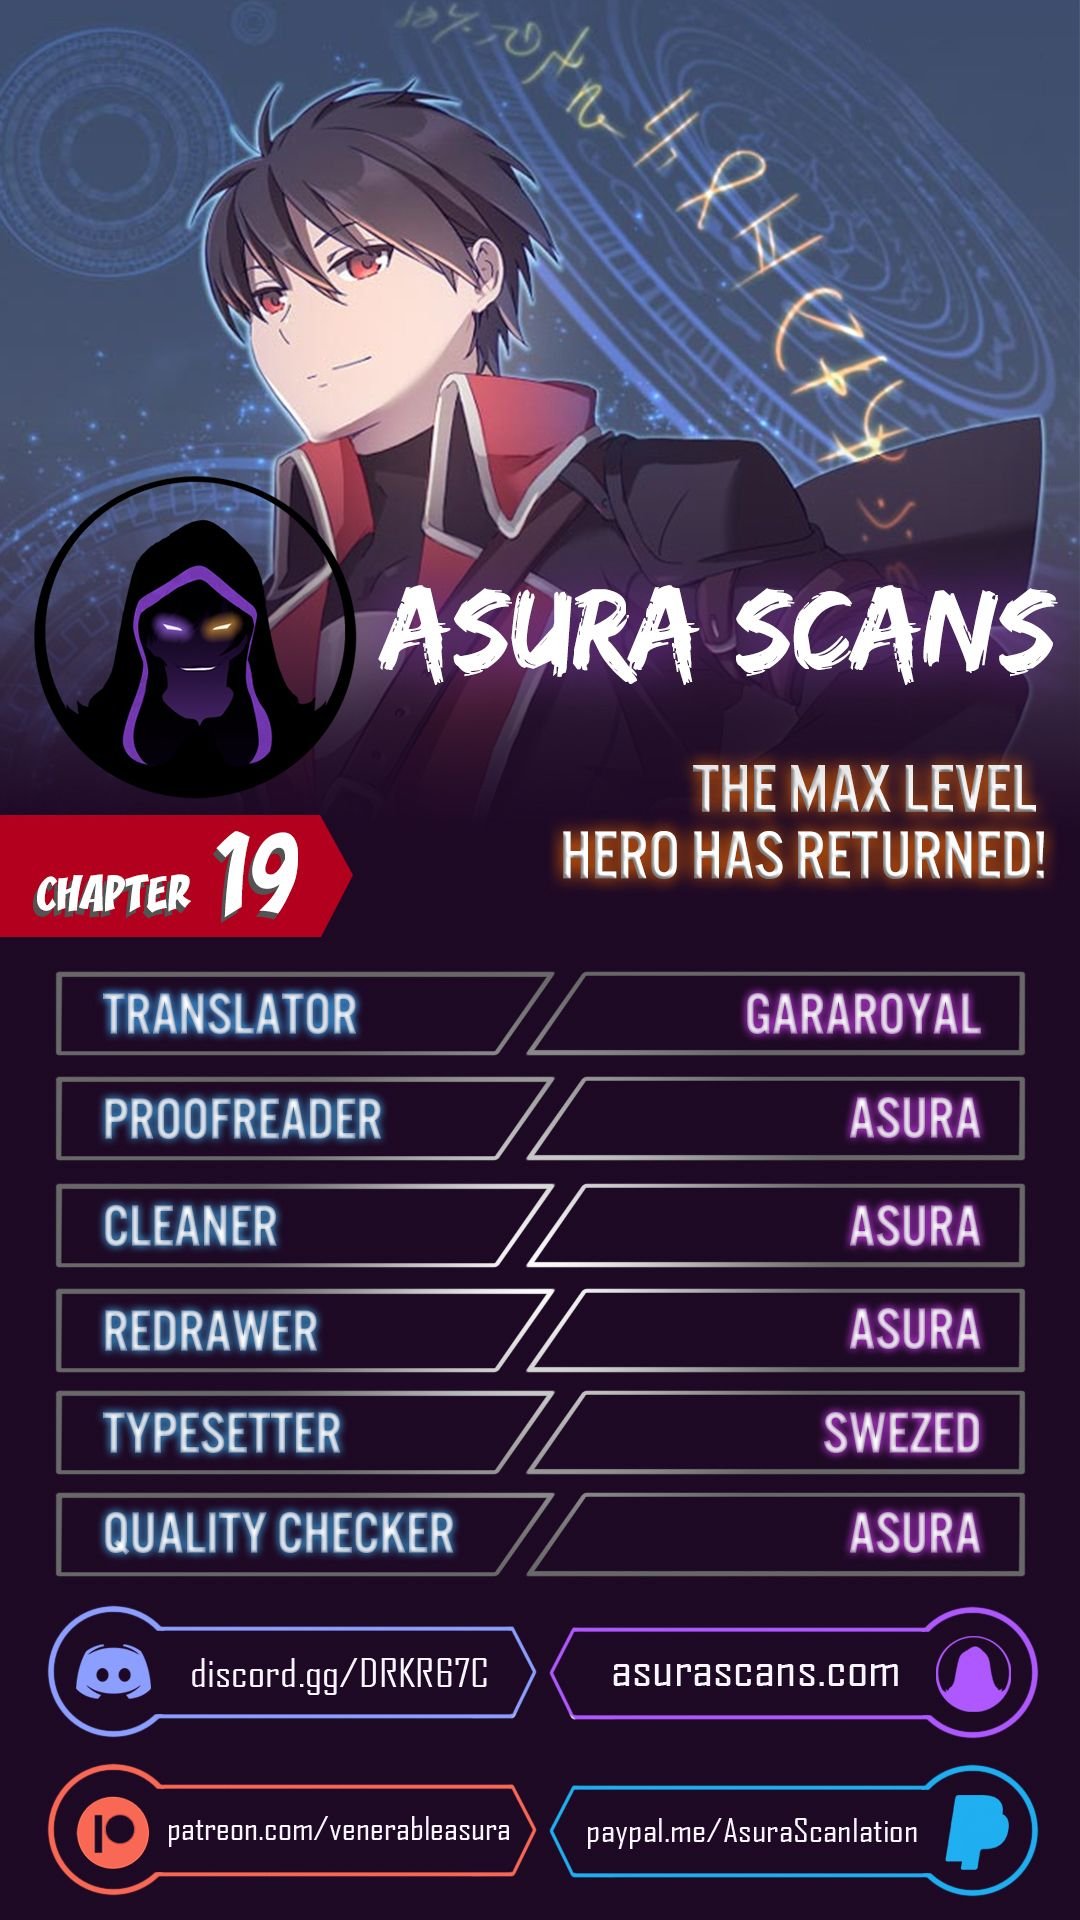 The MAX leveled hero will return! Chapter 19